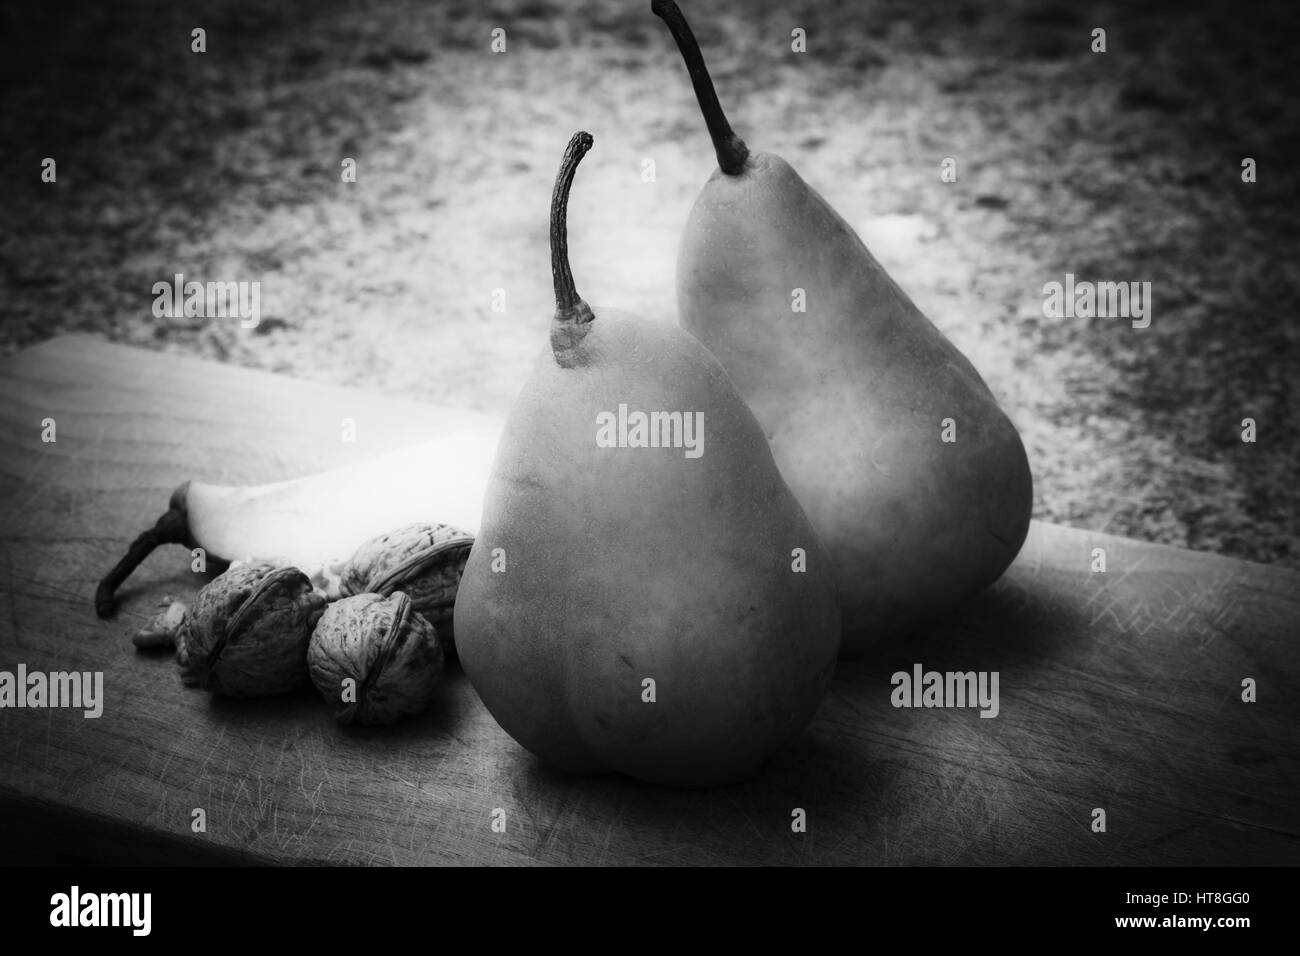 Pears and nuts Stock Photo